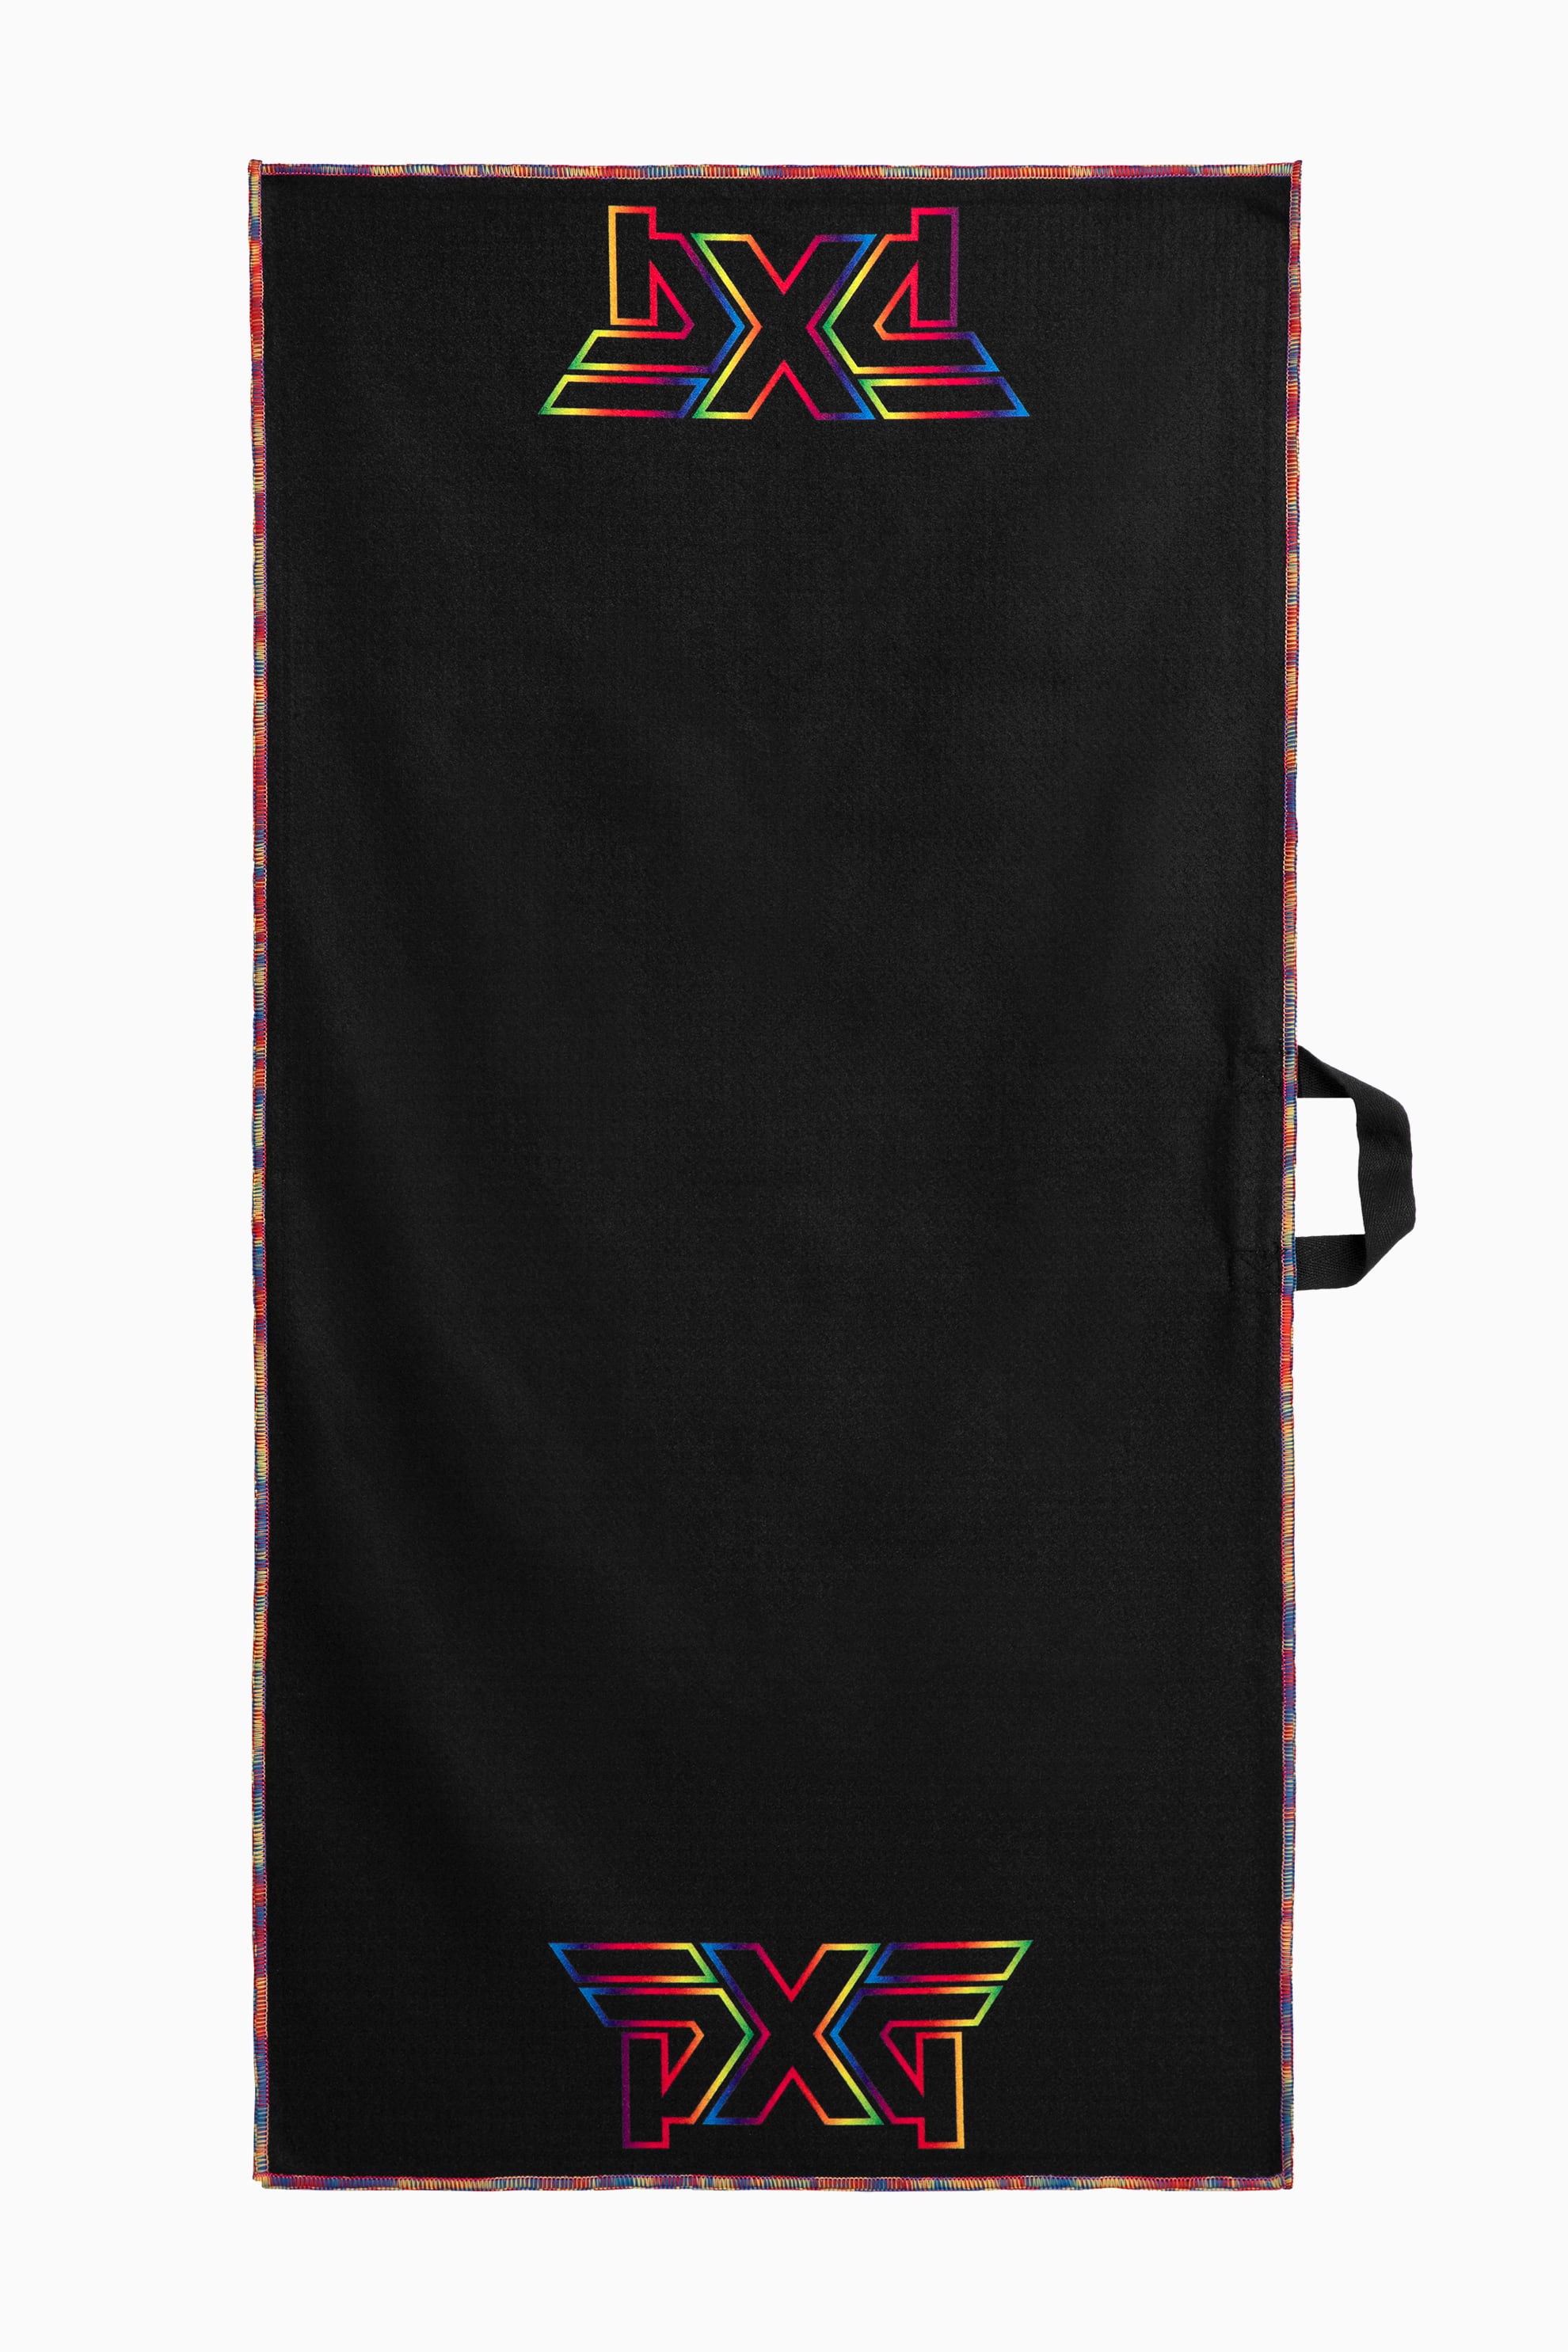 https://www.pxg.com/on/demandware.static/-/Sites-pxg-master/default/dwbff4b4e4/images/hi-res/accessories/on%20the%20course/towels/Pride%20Player%20Towel/Pride-Outline-Players-Towel-Listing-1-HiRes.jpeg